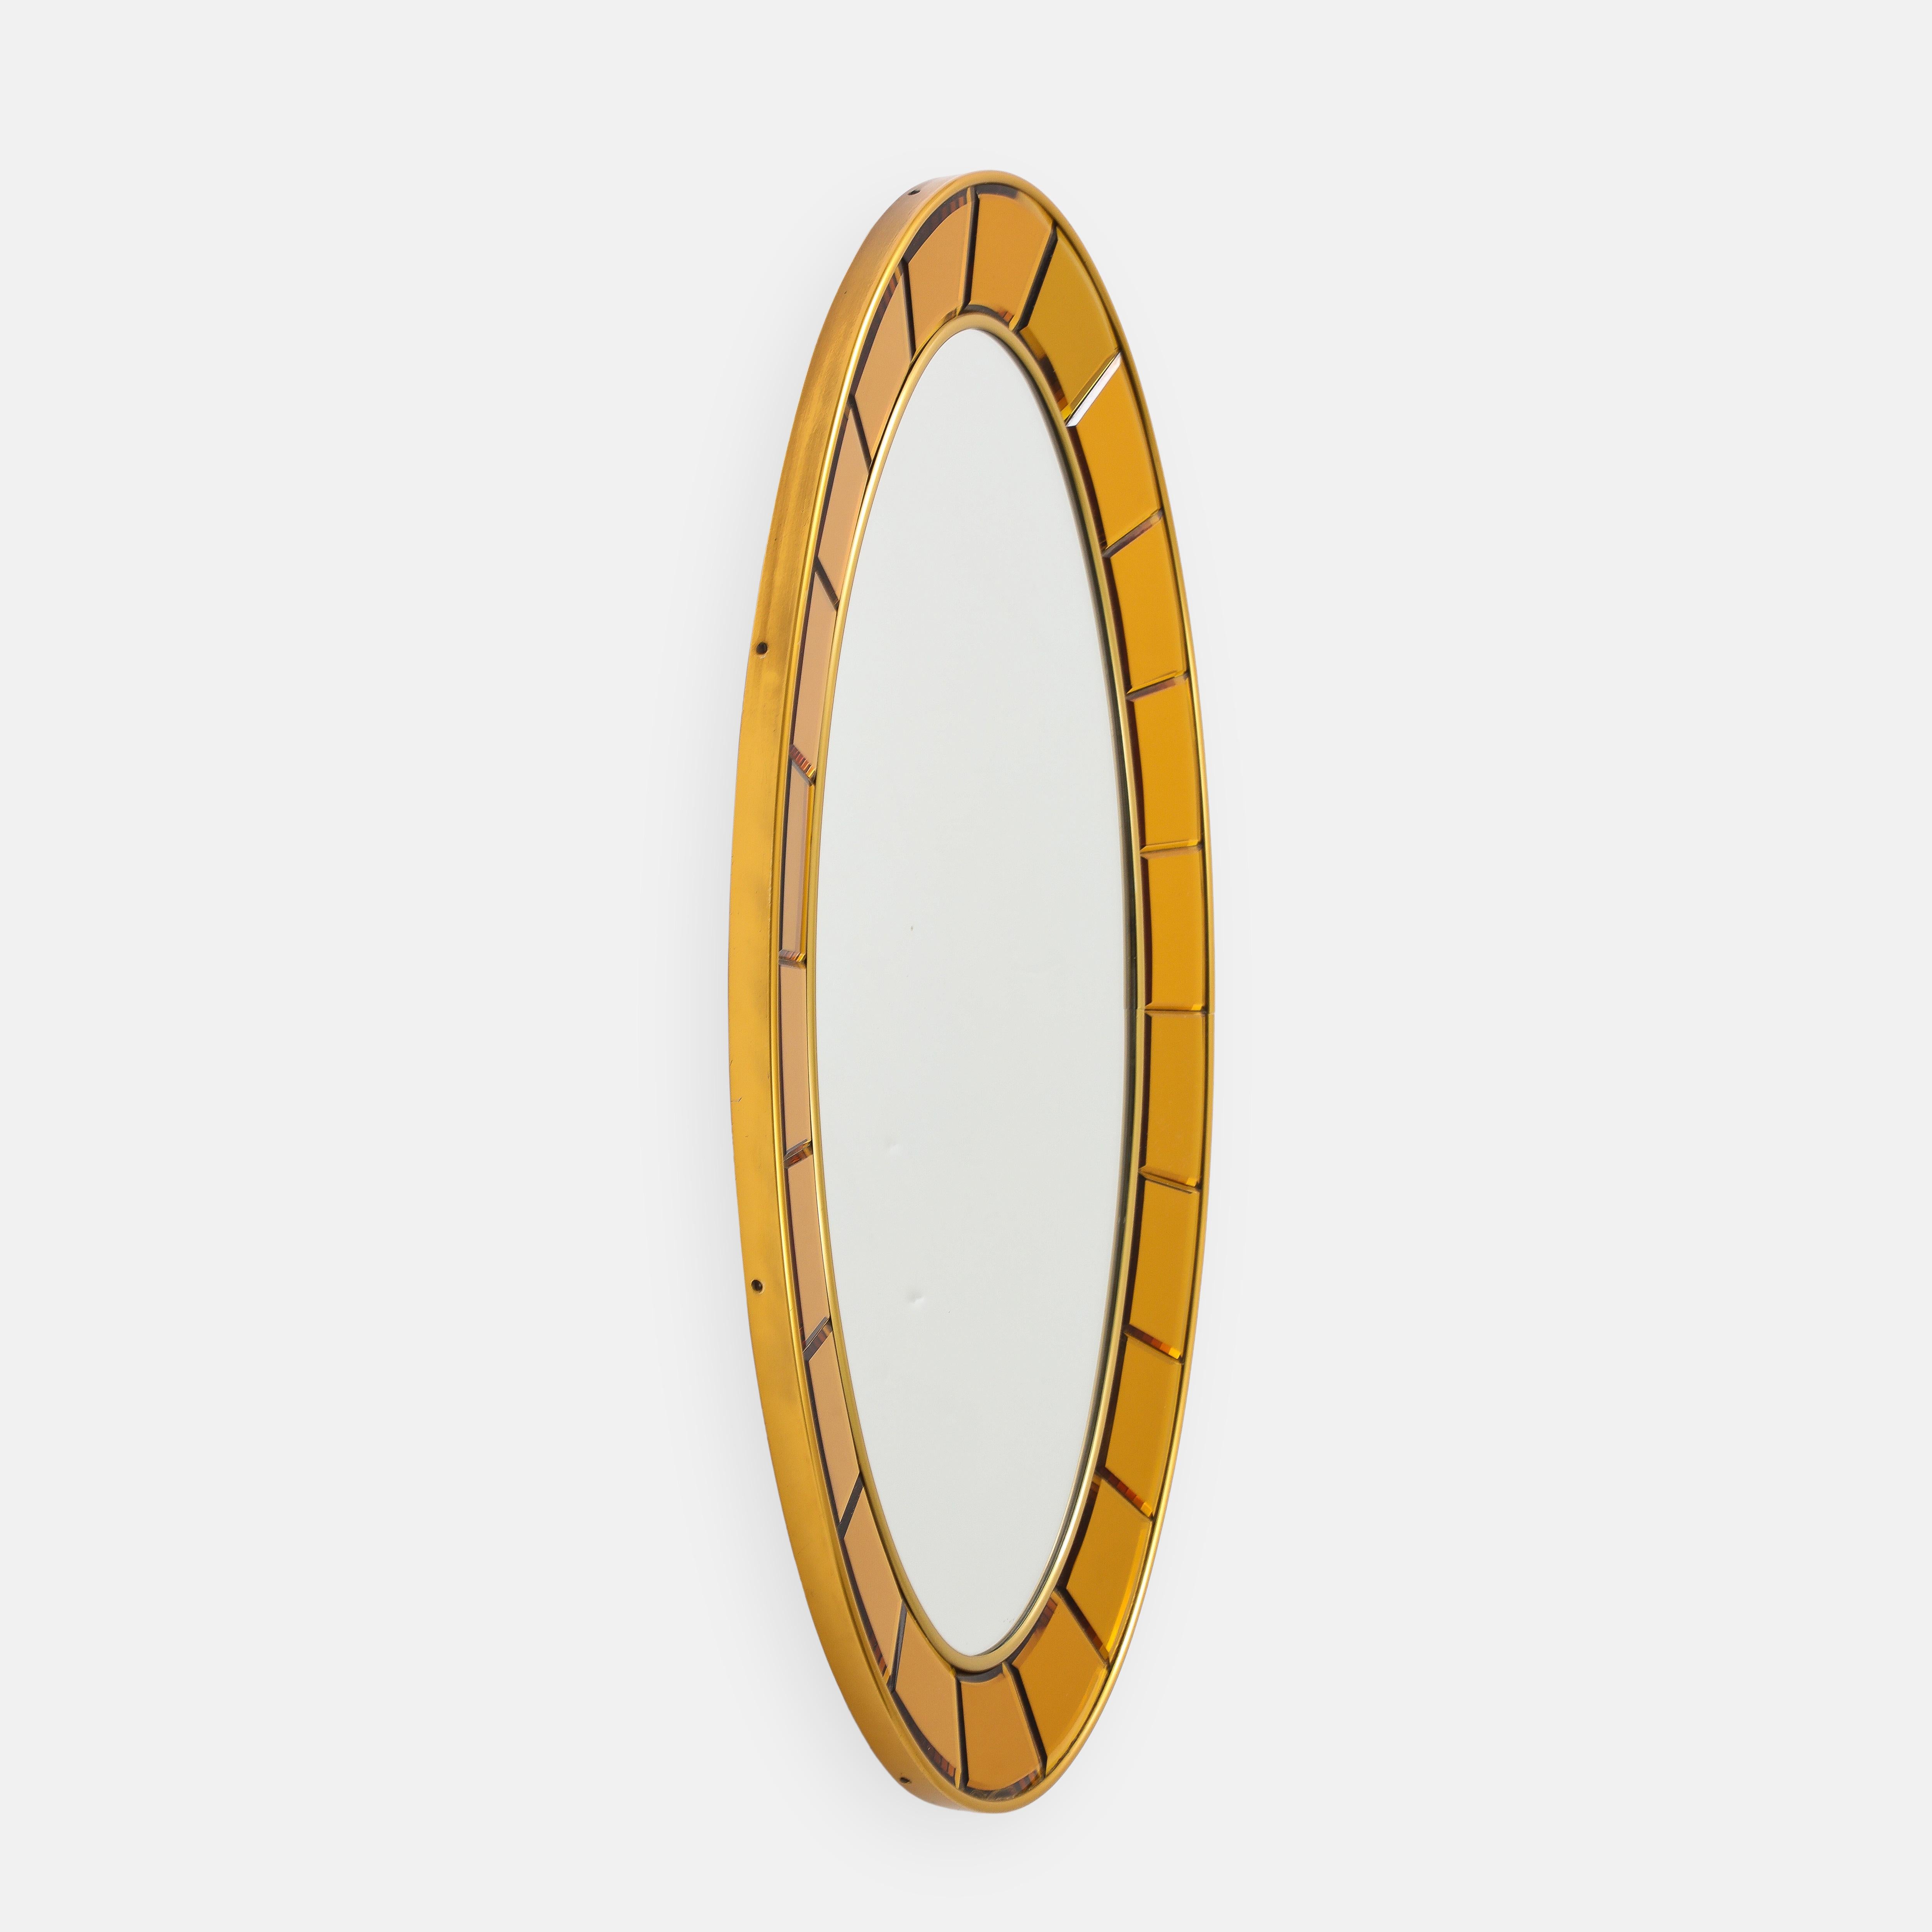 Mid-Century Modern Cristal Art Oval Gold Hand-Cut Beveled Glass Mirror Model 2727, 1950s For Sale